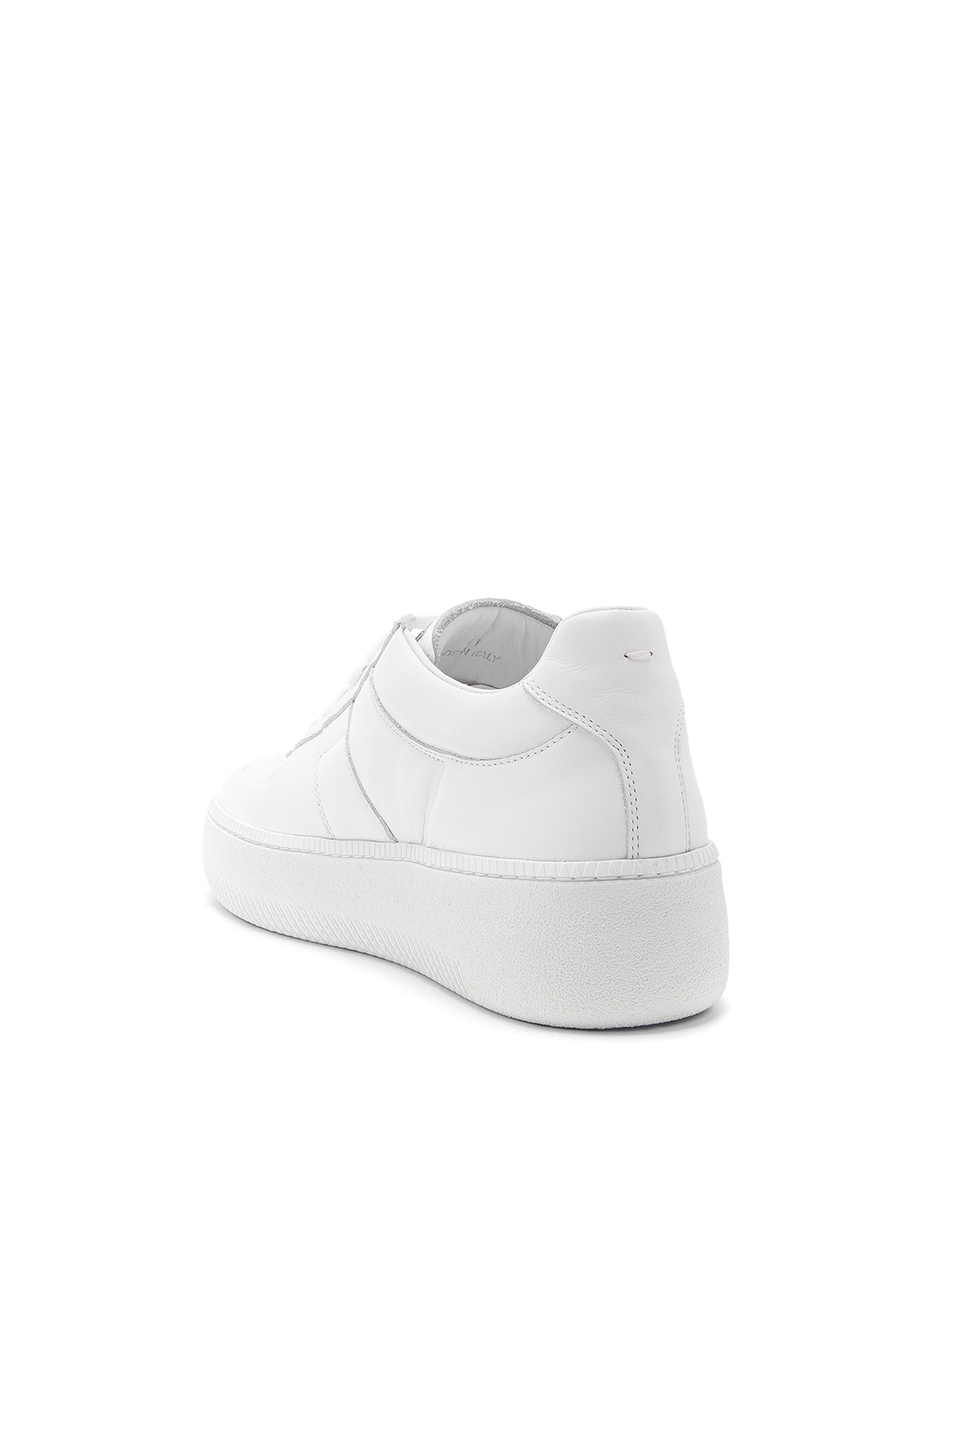 MAISON MARTIN MARGIELA Soft Leather Low-Top Sneakers in White | ModeSens